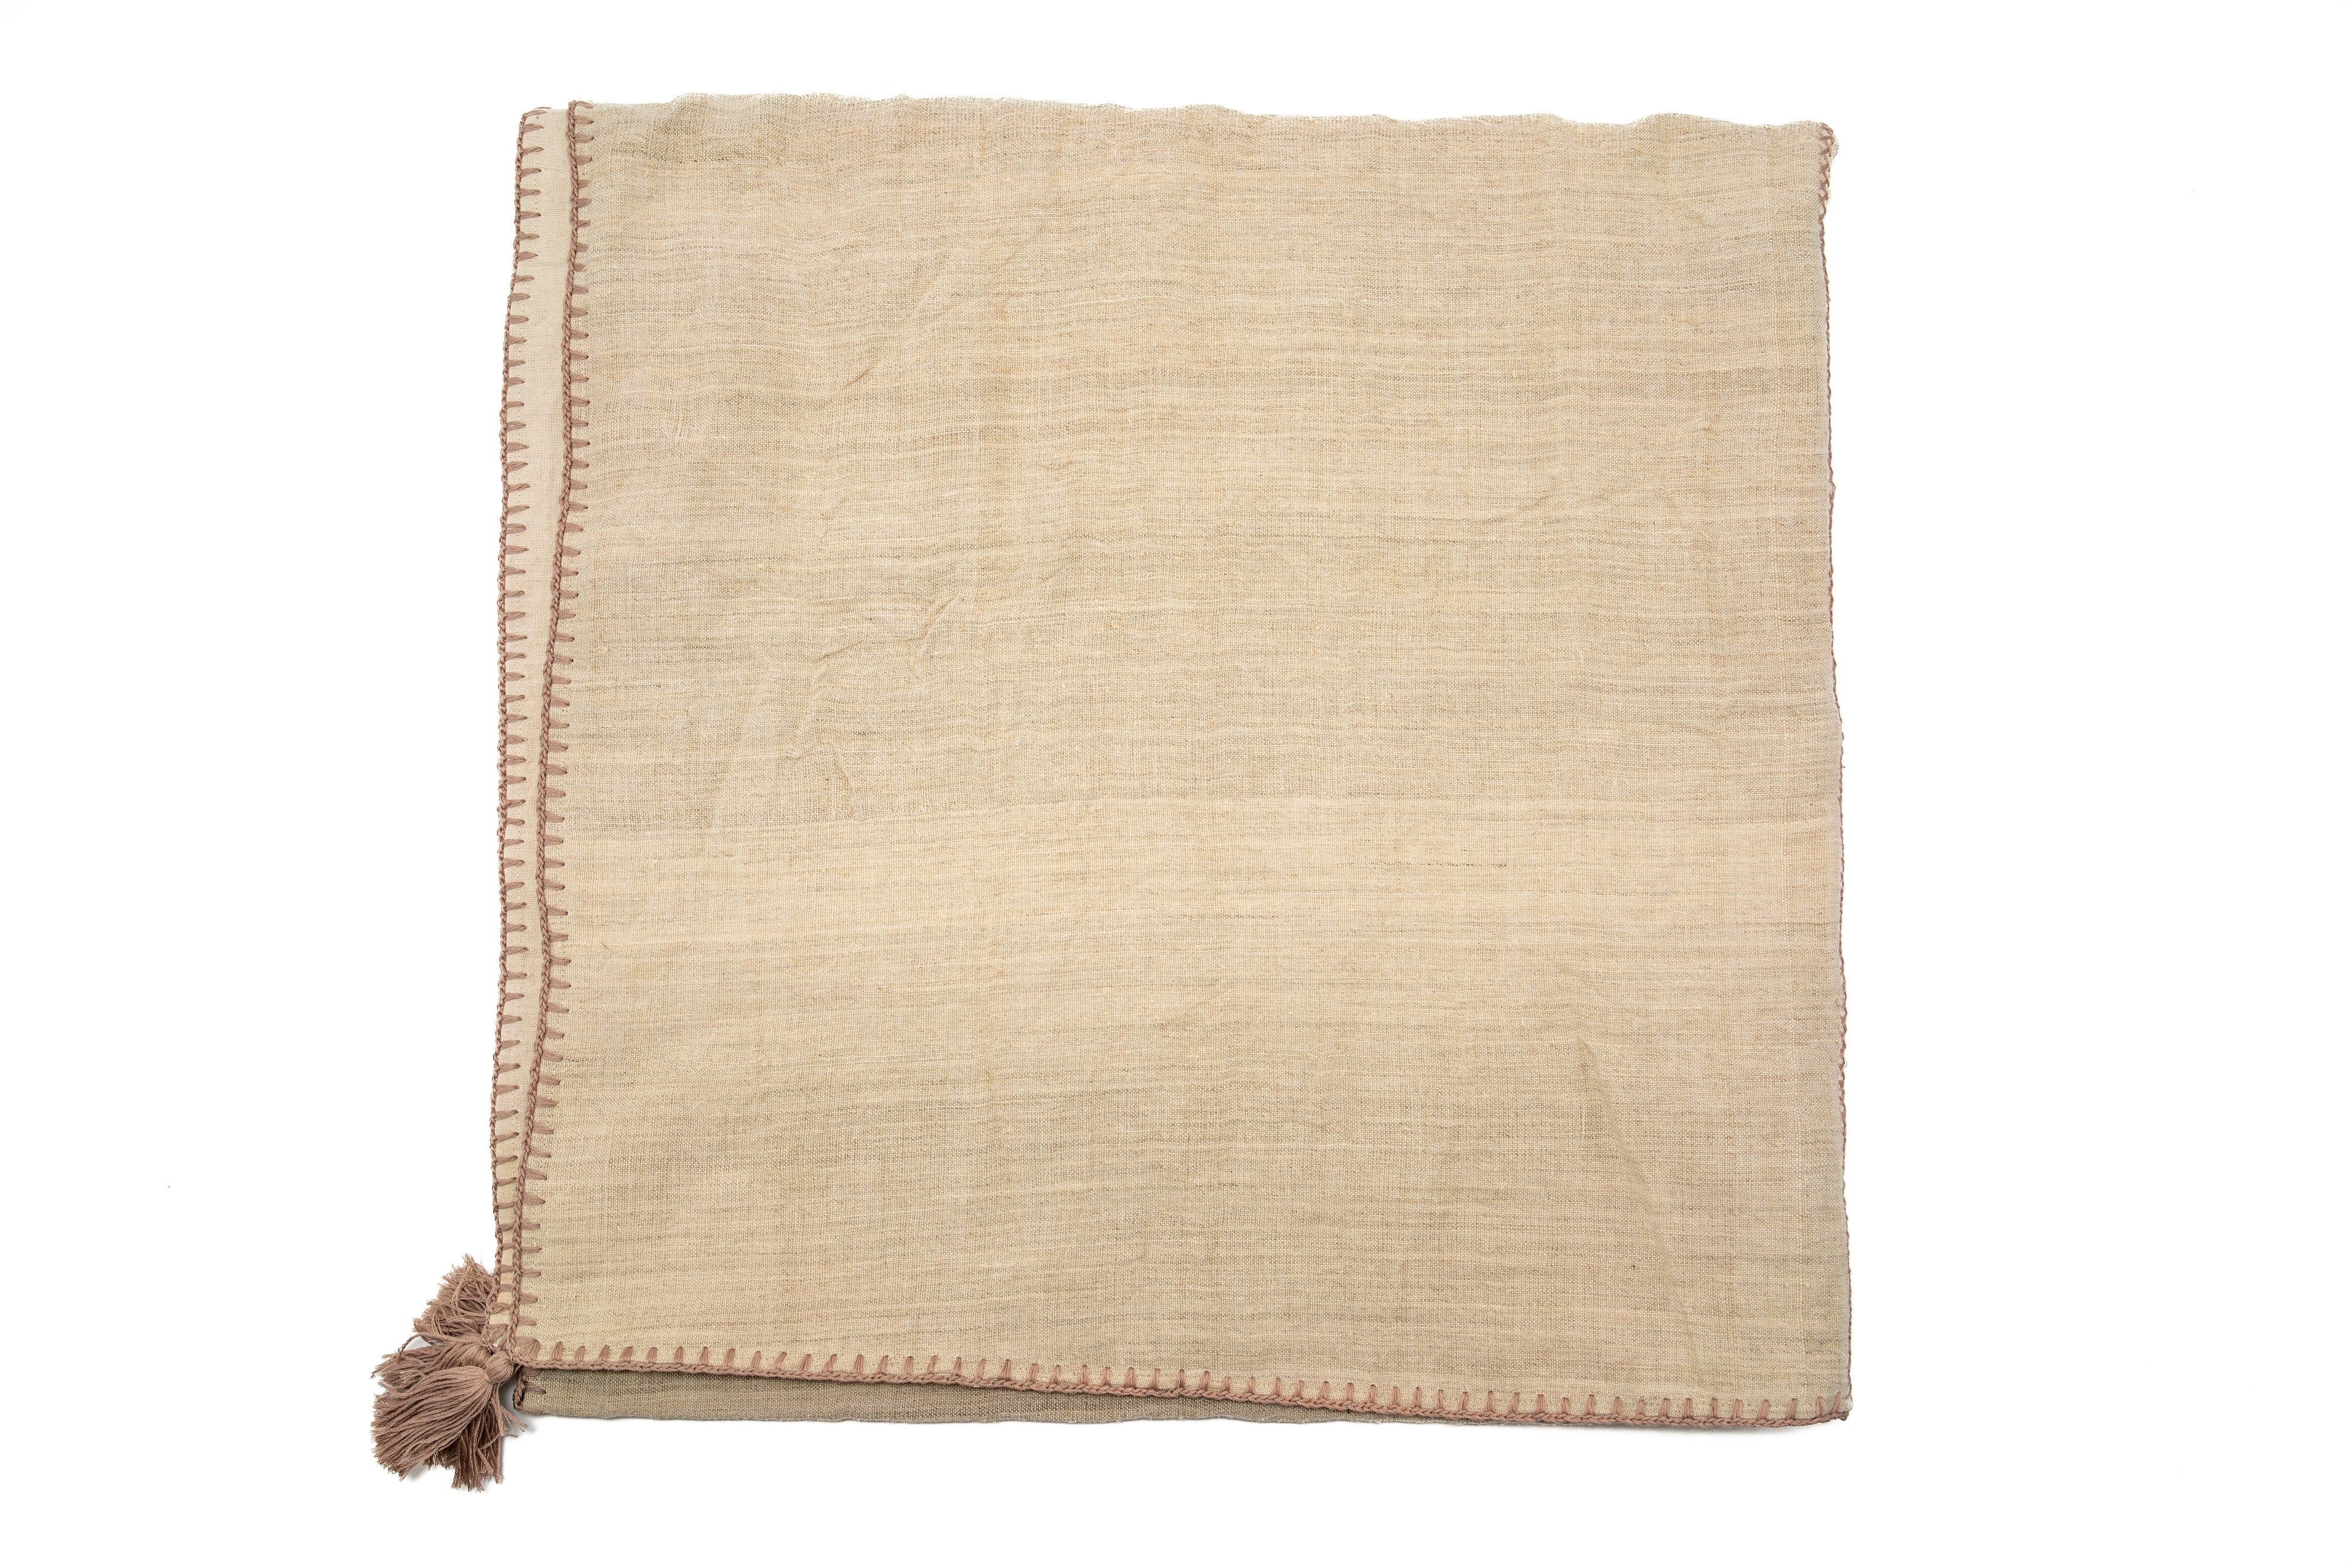 Bed Cover - Antique Hemp, double layer, hand stiching - BC02